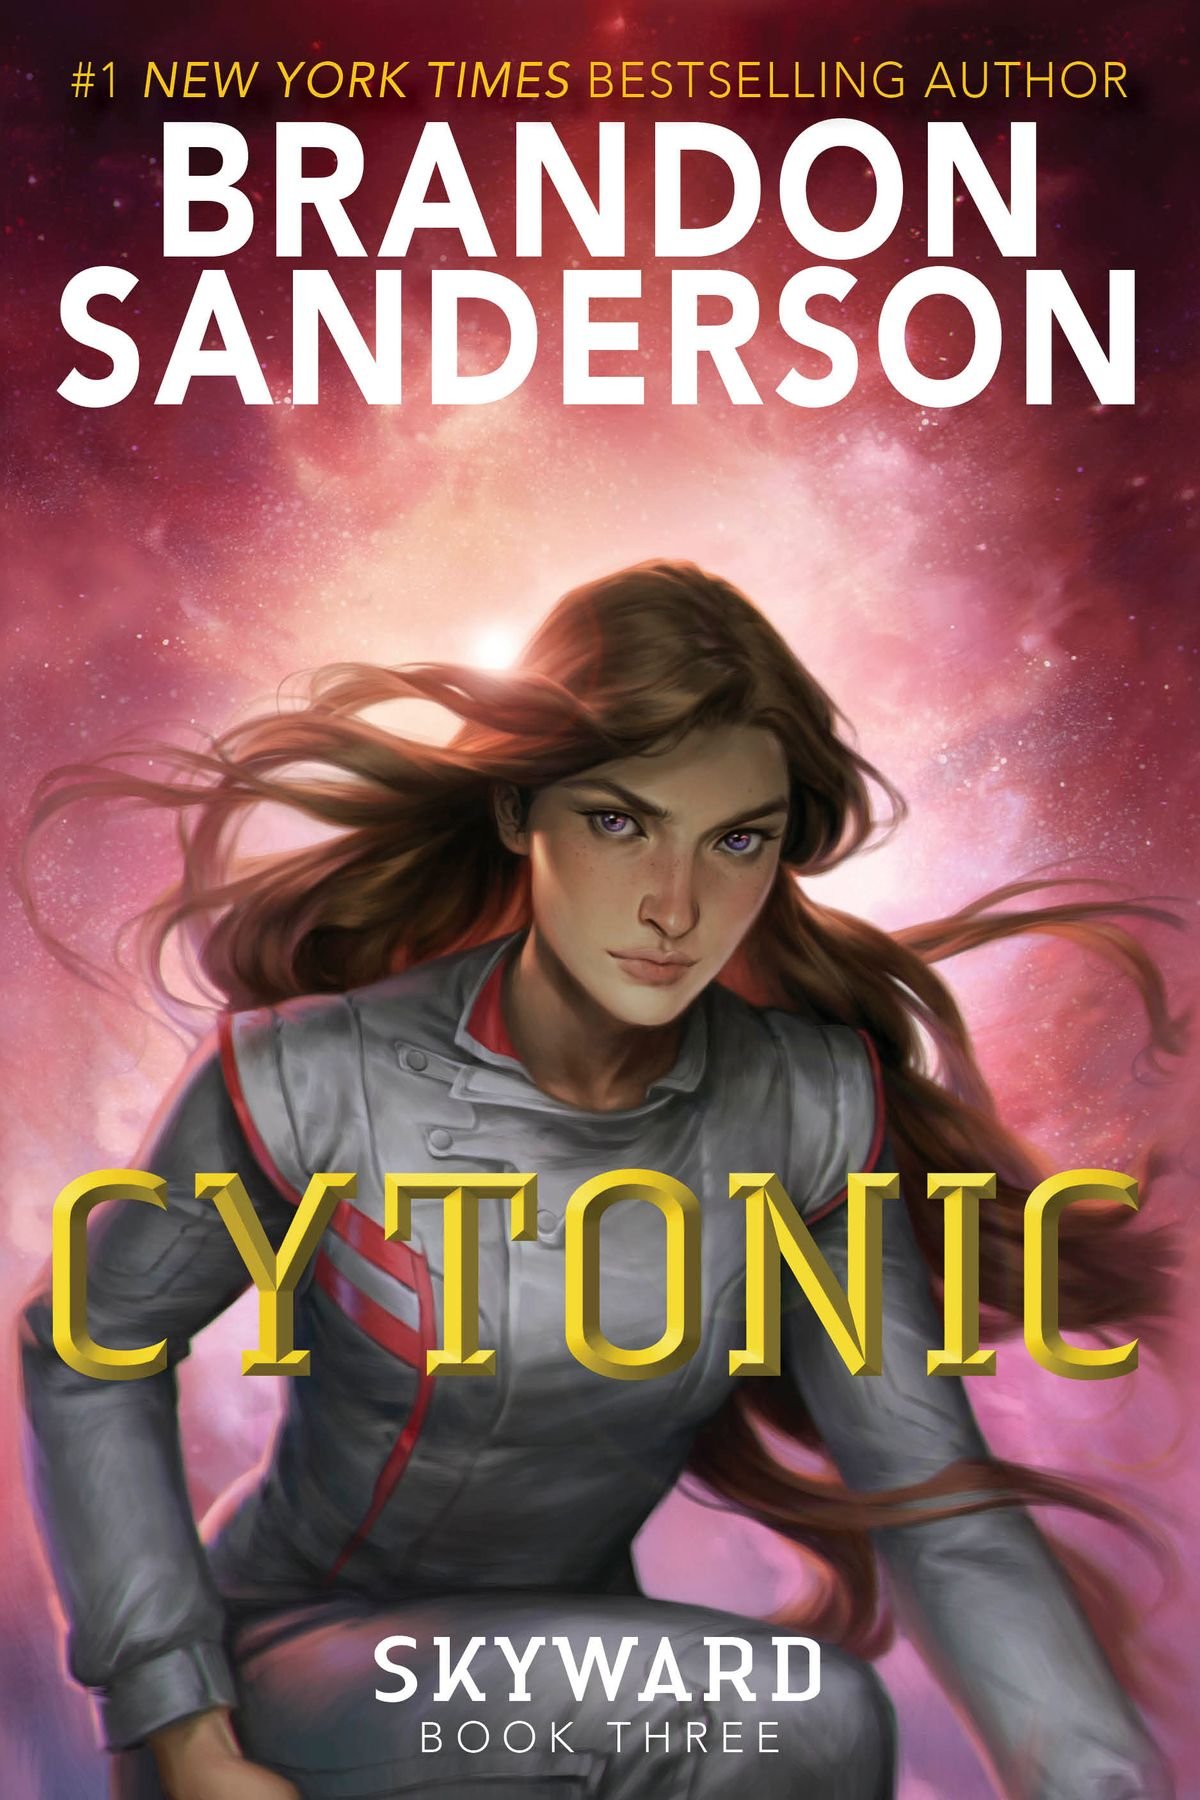 More information about "Cytonic Is Nearly Upon Us + Our Spoiler Policy Information"